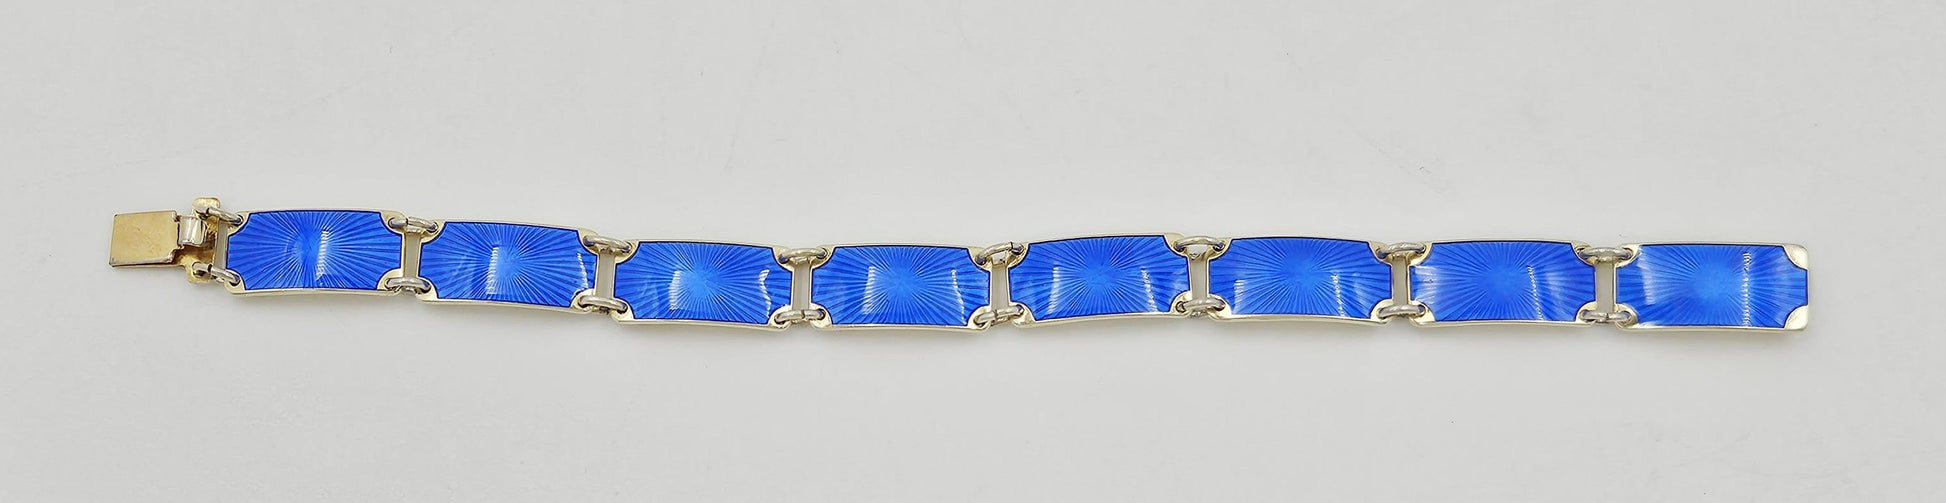 OPRO Jewelry OPRO Norway Sterling Royal Blue Guilloche Enameled Bracelet Circa 1970's